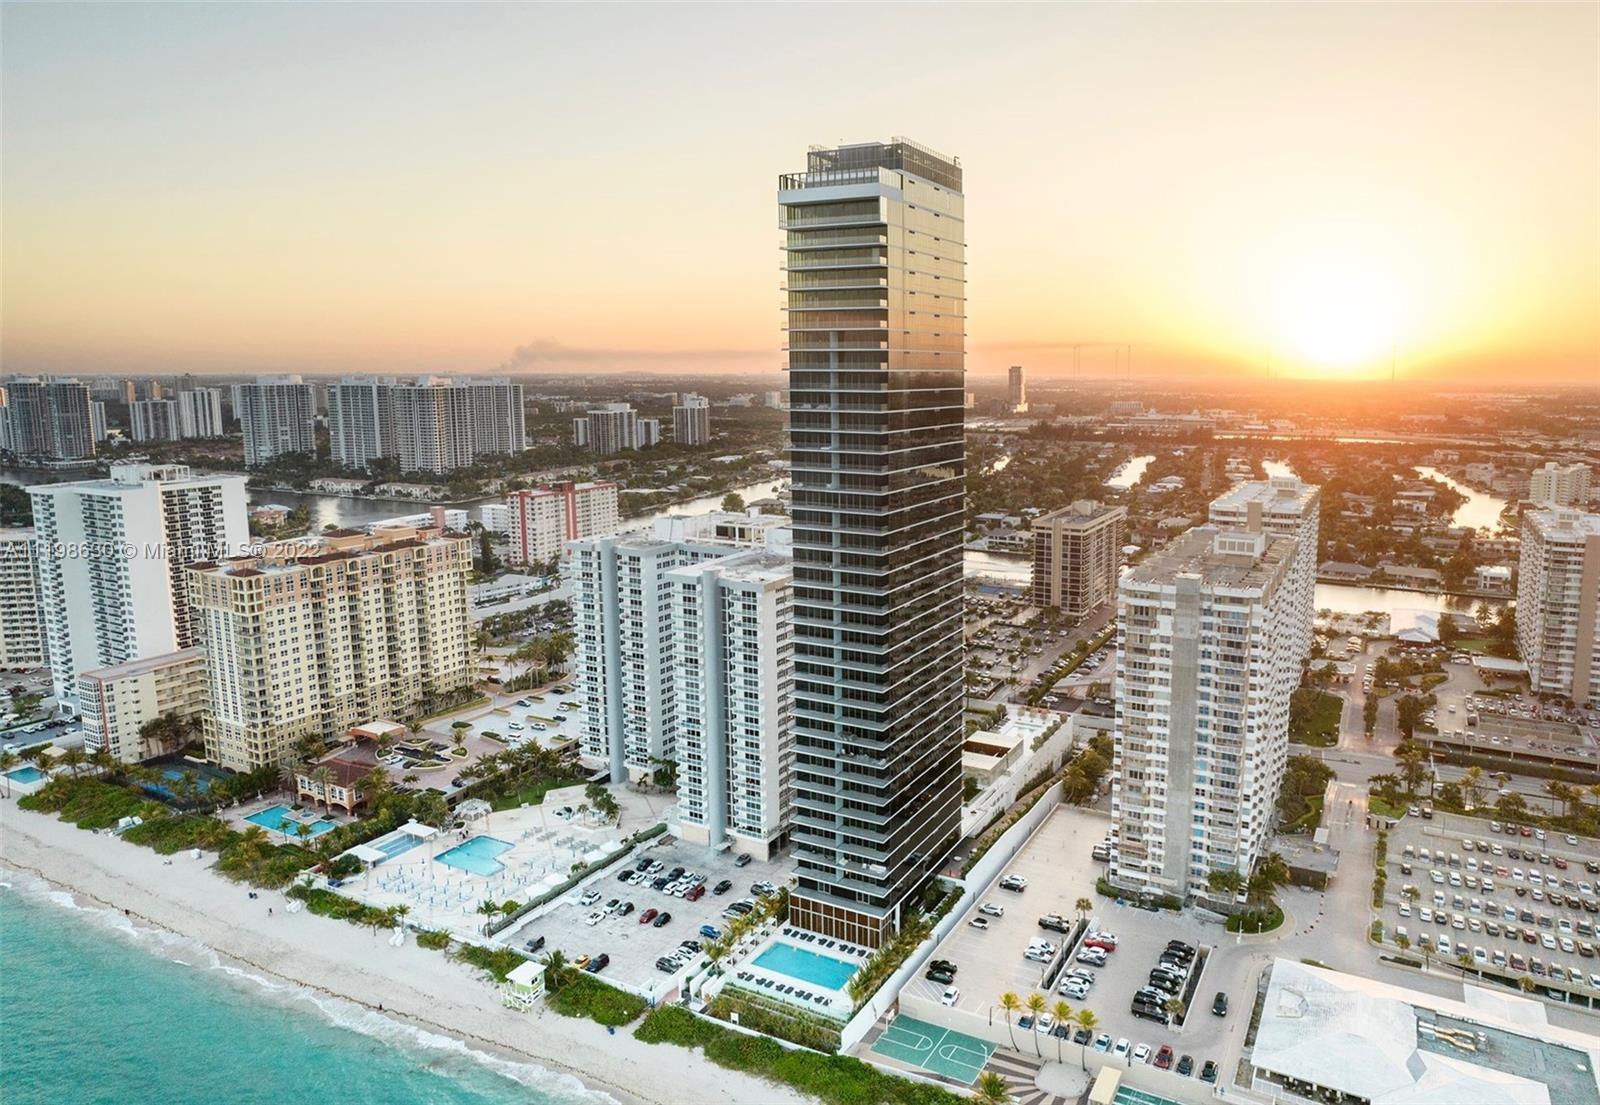 40-story luxury oceanfront boutique building with only 64 sprawling residences, located just north o